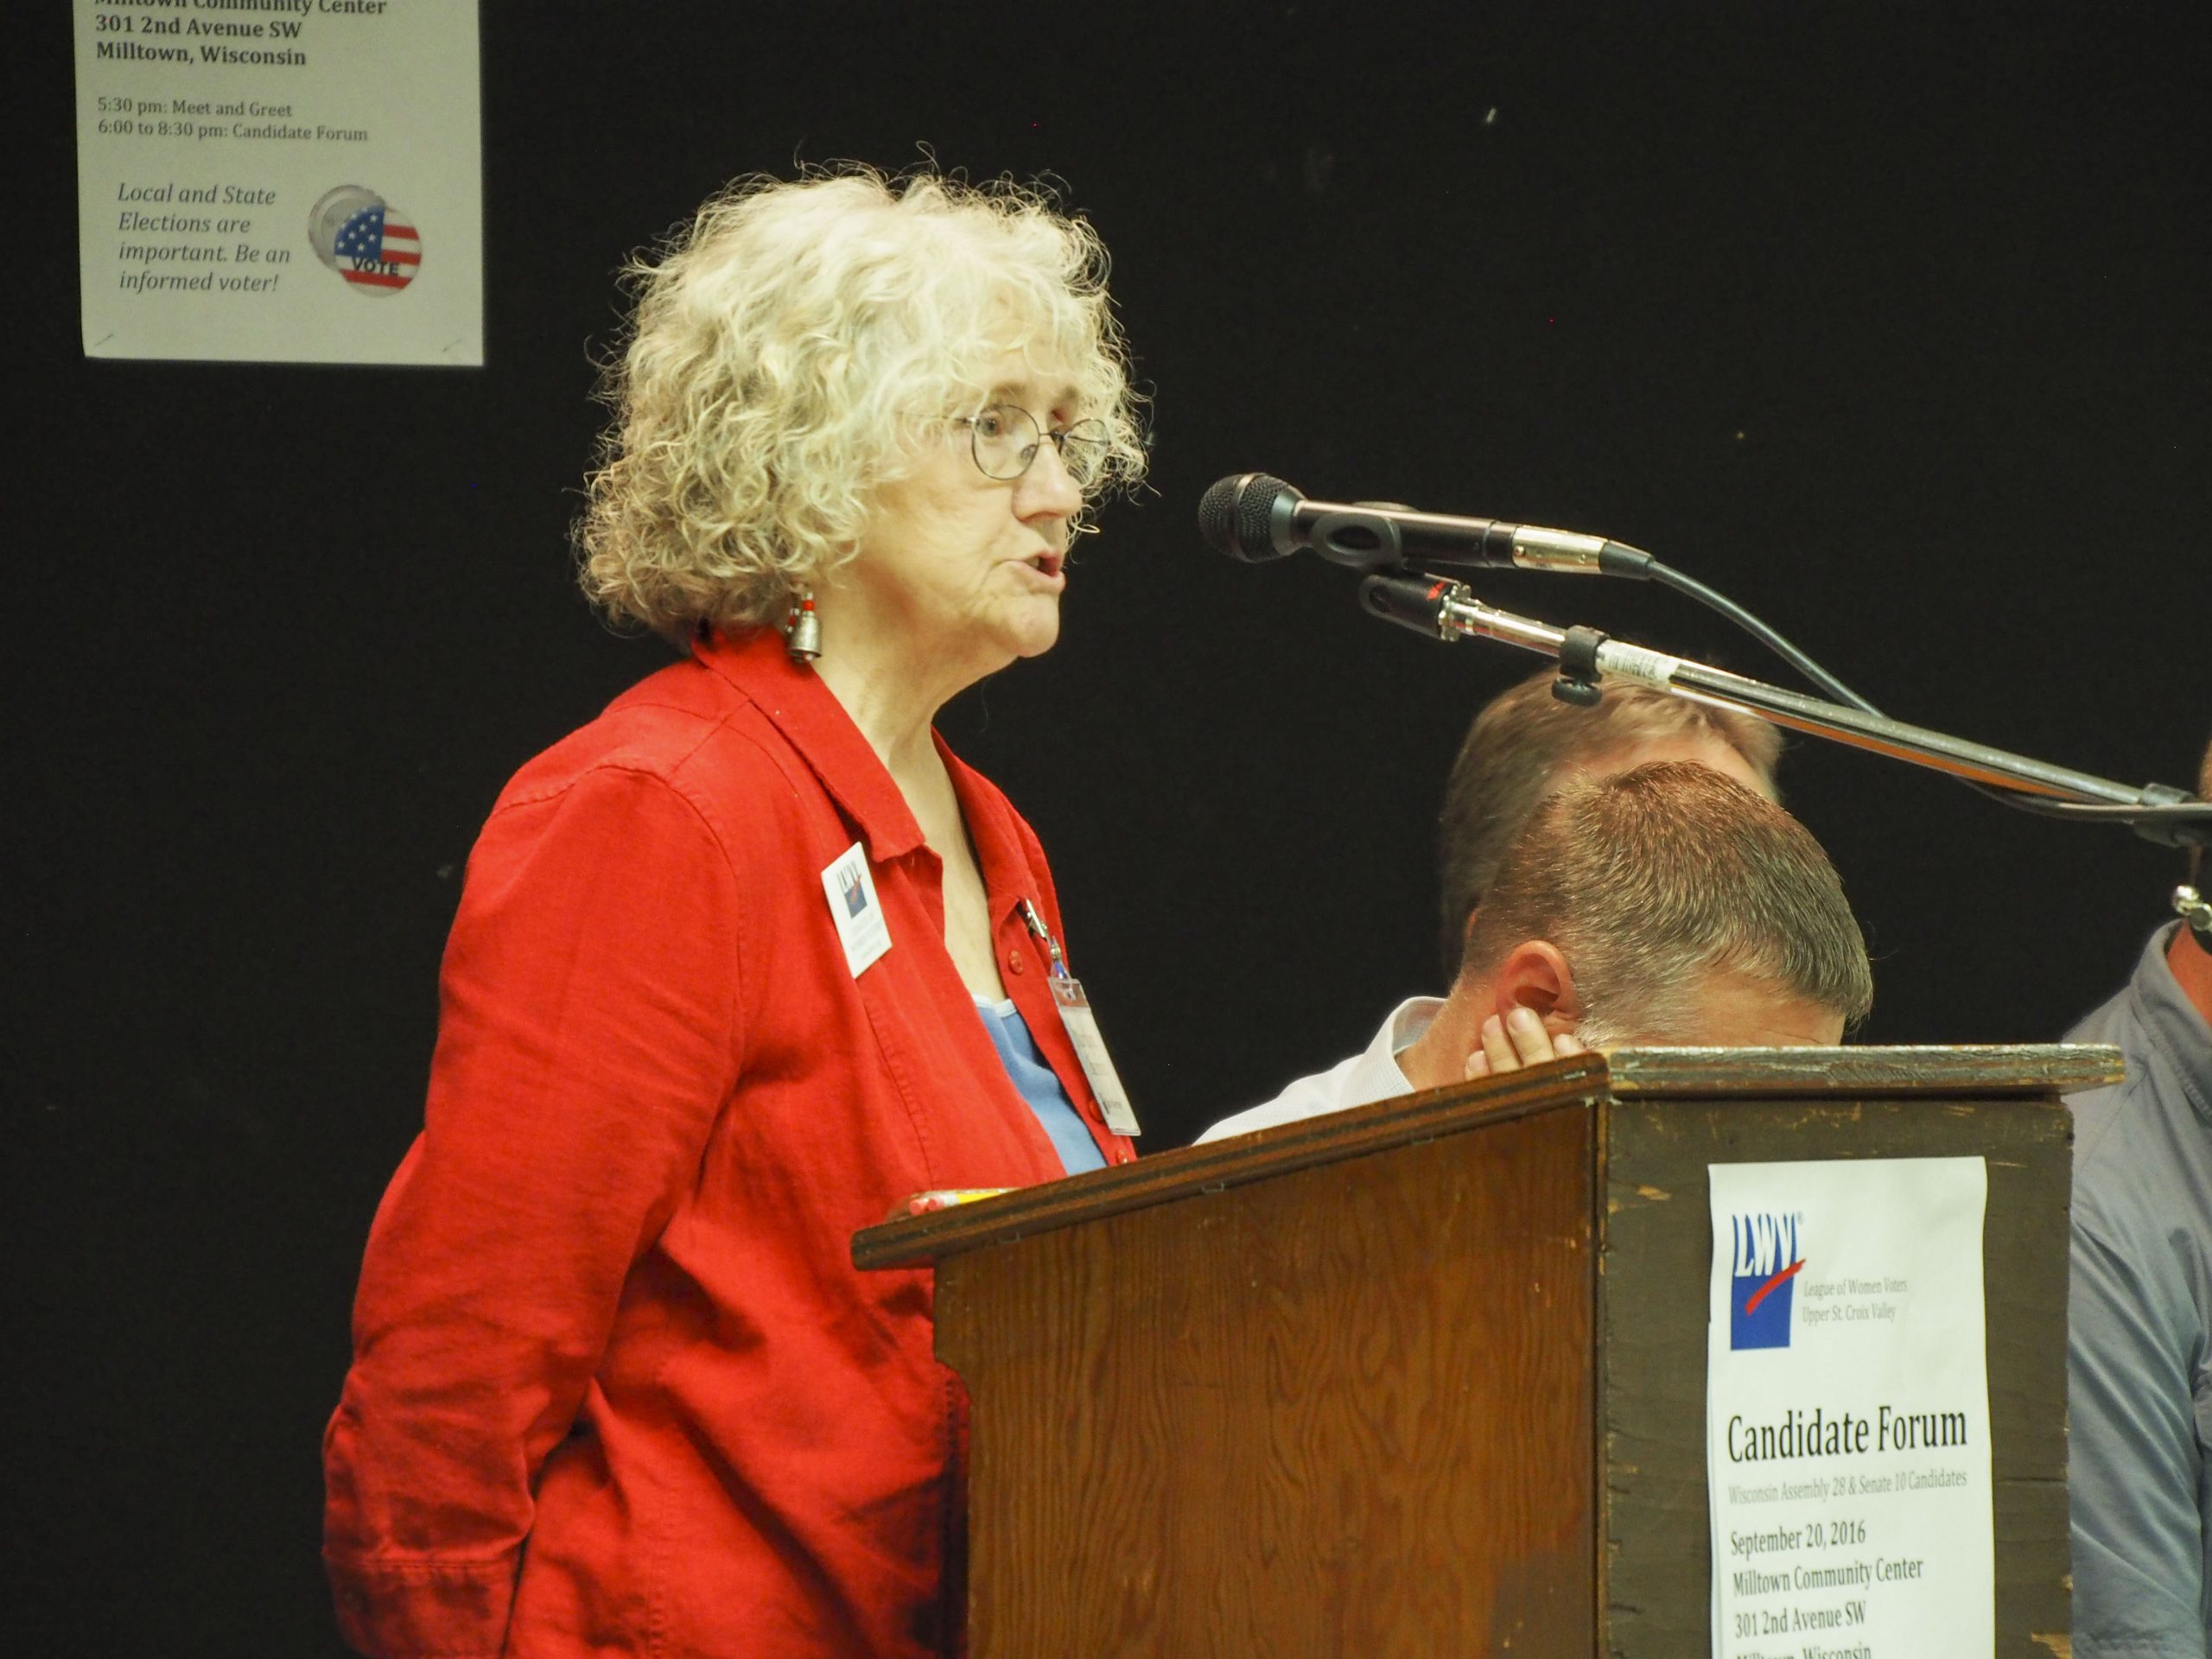 A woman stands at a microphone